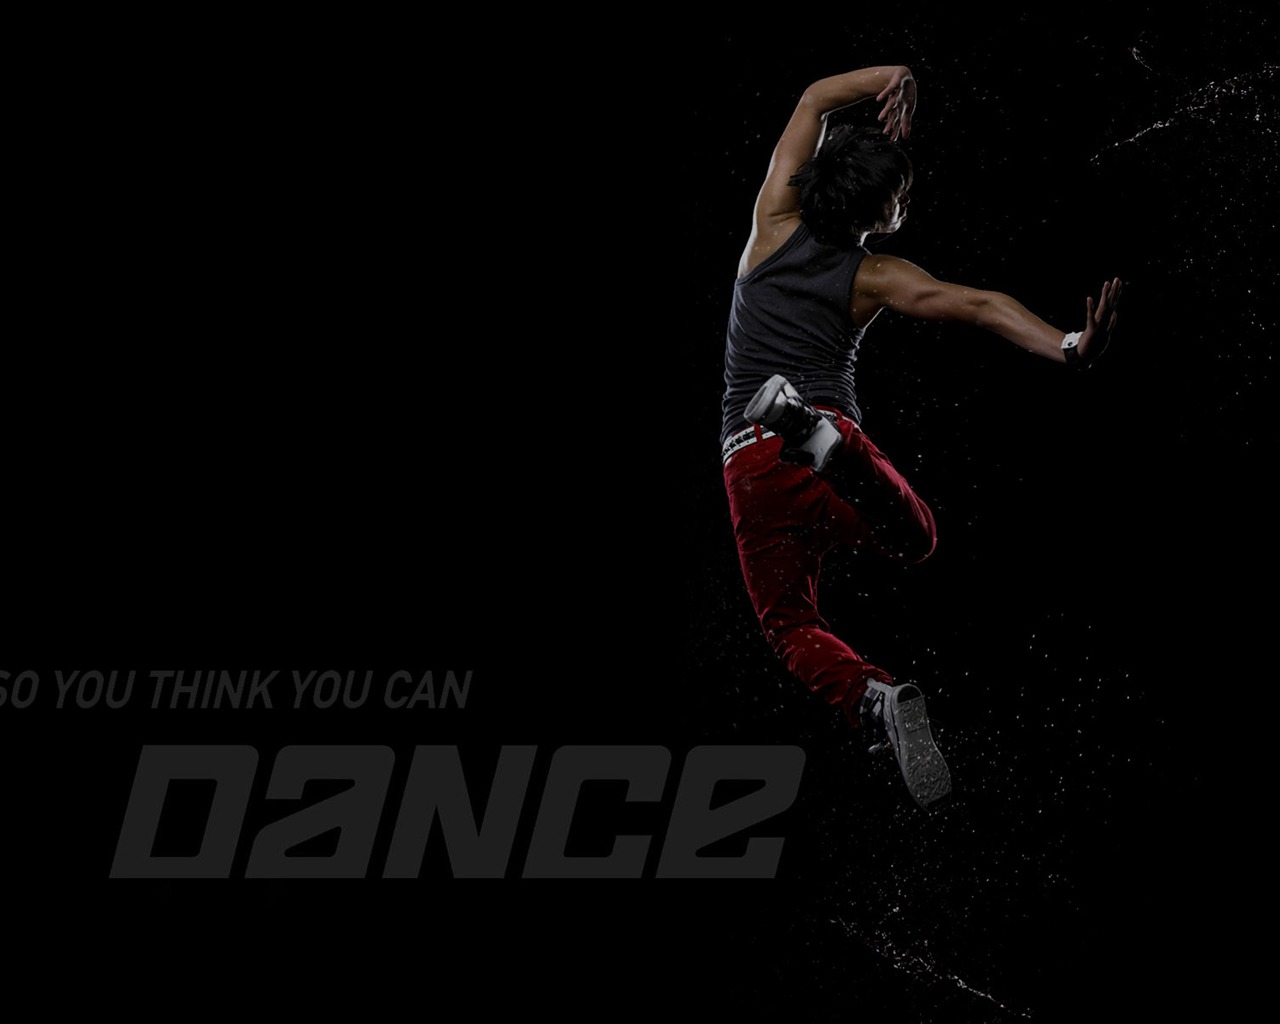 So You Think You Can Dance 舞林争霸 壁纸(二)12 - 1280x1024